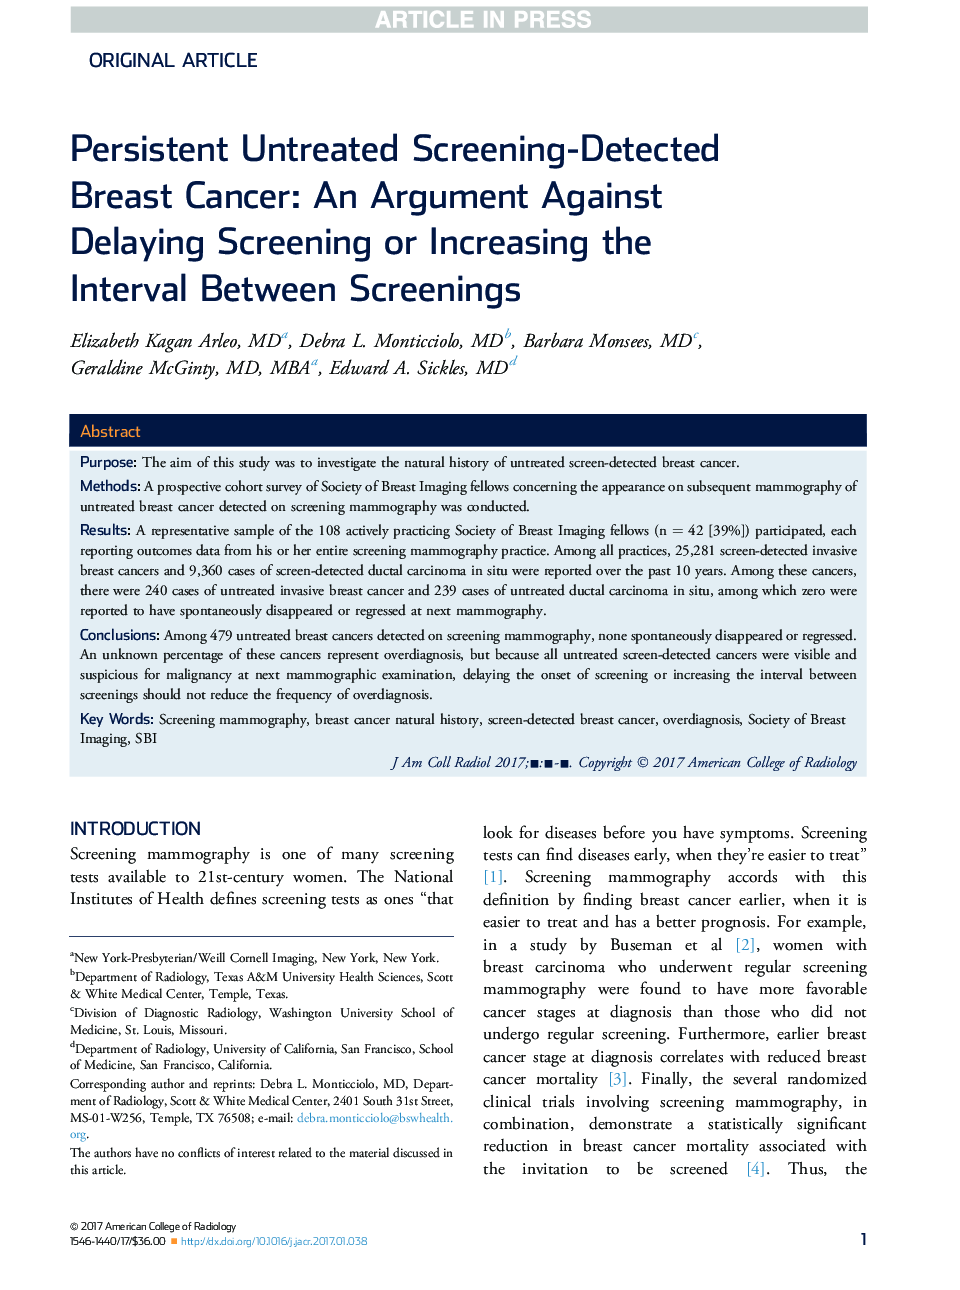 Persistent Untreated Screening-Detected Breast Cancer: An Argument Against Delaying Screening or Increasing the Interval Between Screenings